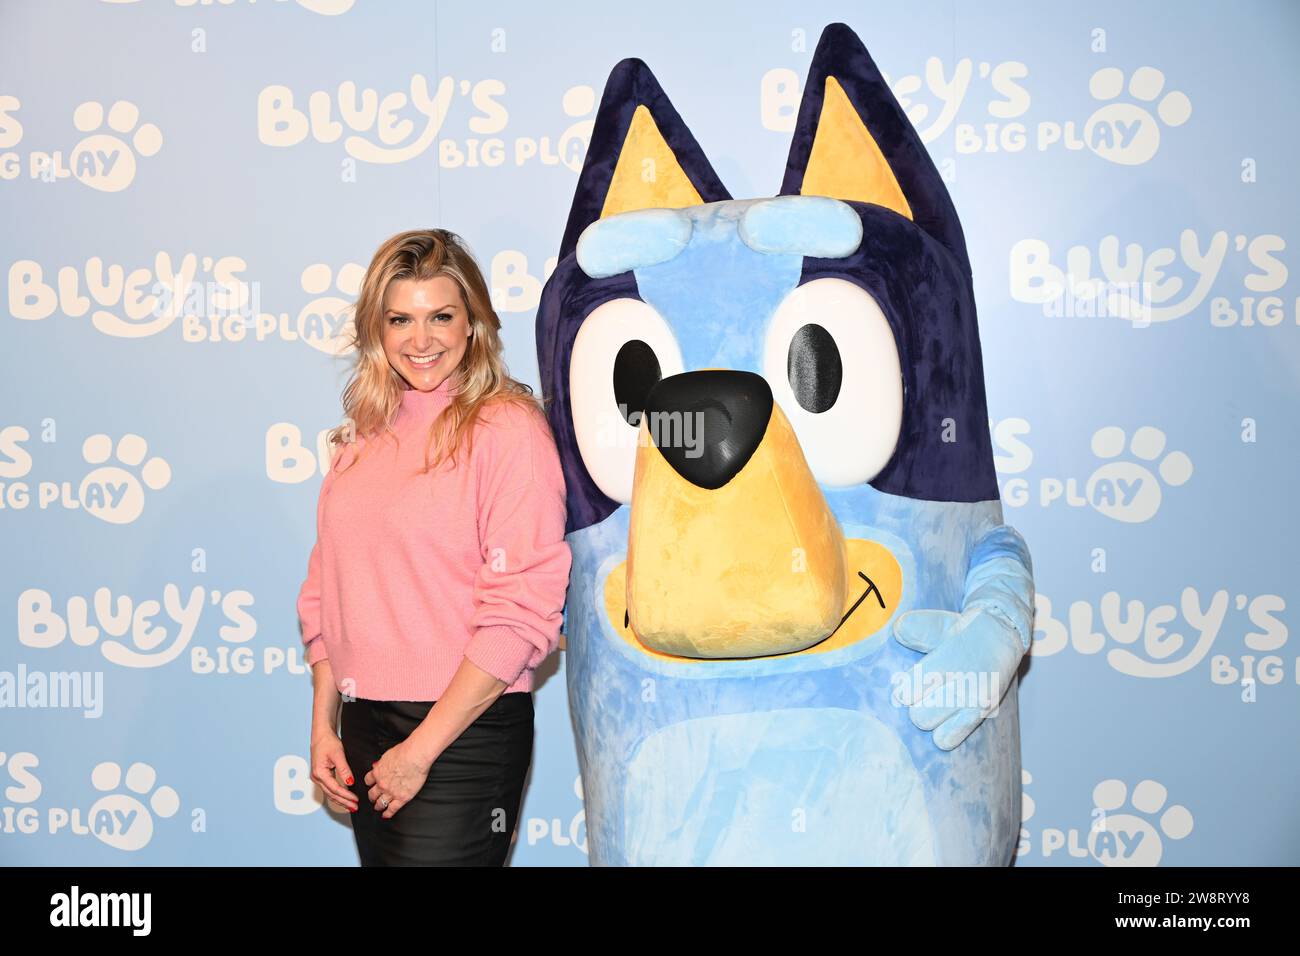 London, UK. 21th December 2023. Anna Williamson attends Gala Performance Bluey's Big Play at Southbank Centre’s Royal Festival Hall, London, UK. Stock Photo